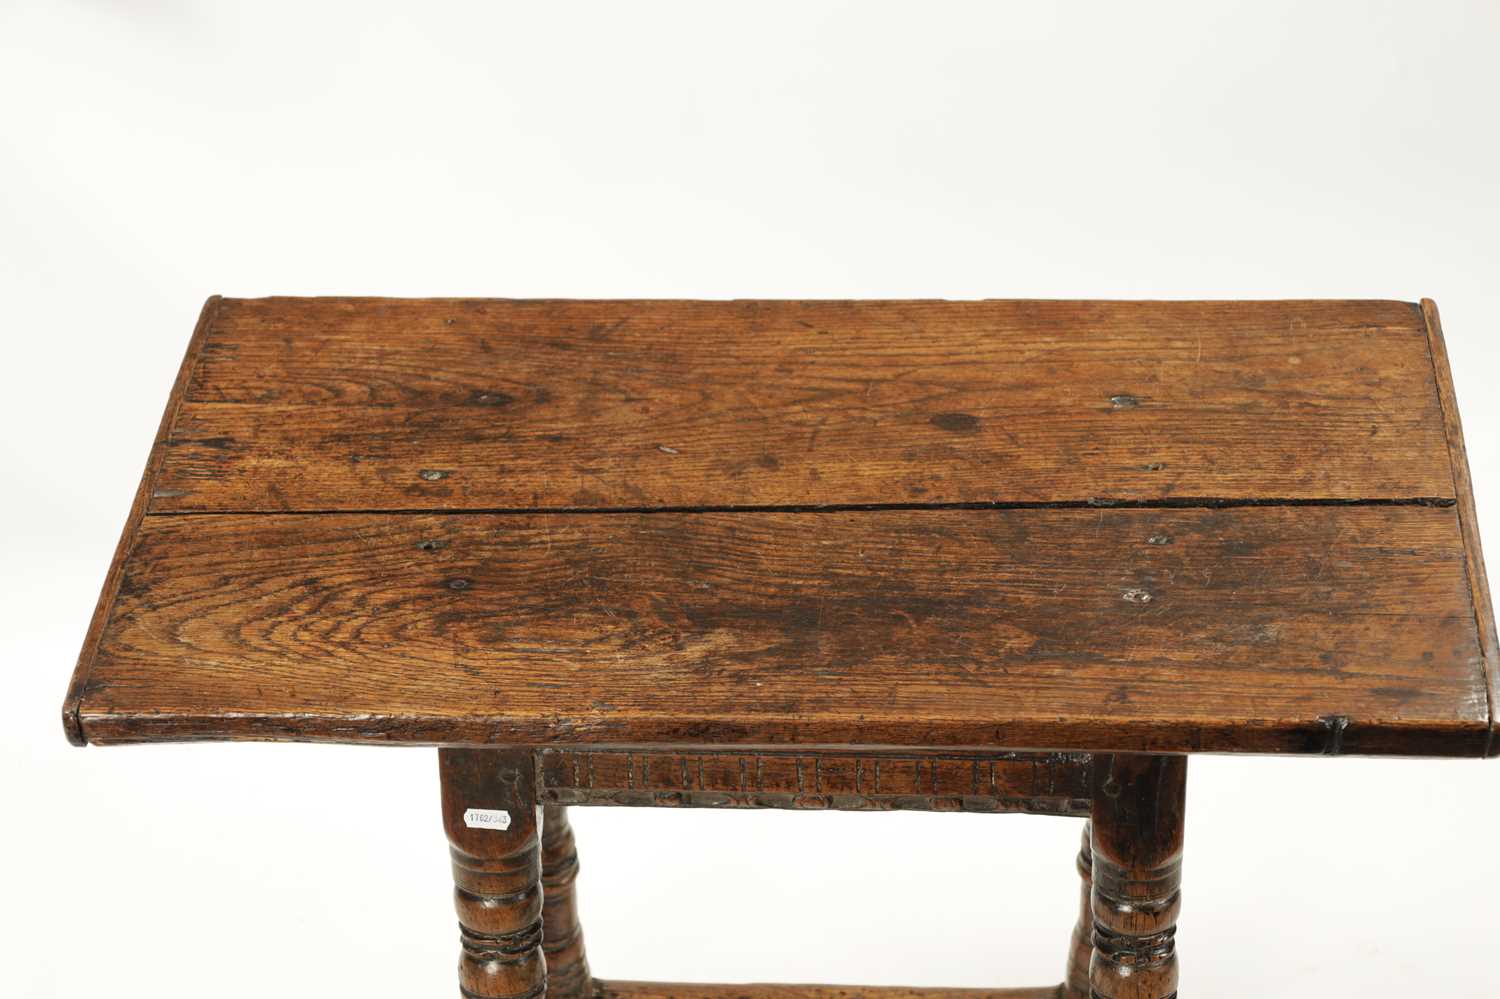 A RARE 17TH CENTURY JOINED OAK TAVERN STOOL/TABLE - Image 2 of 7